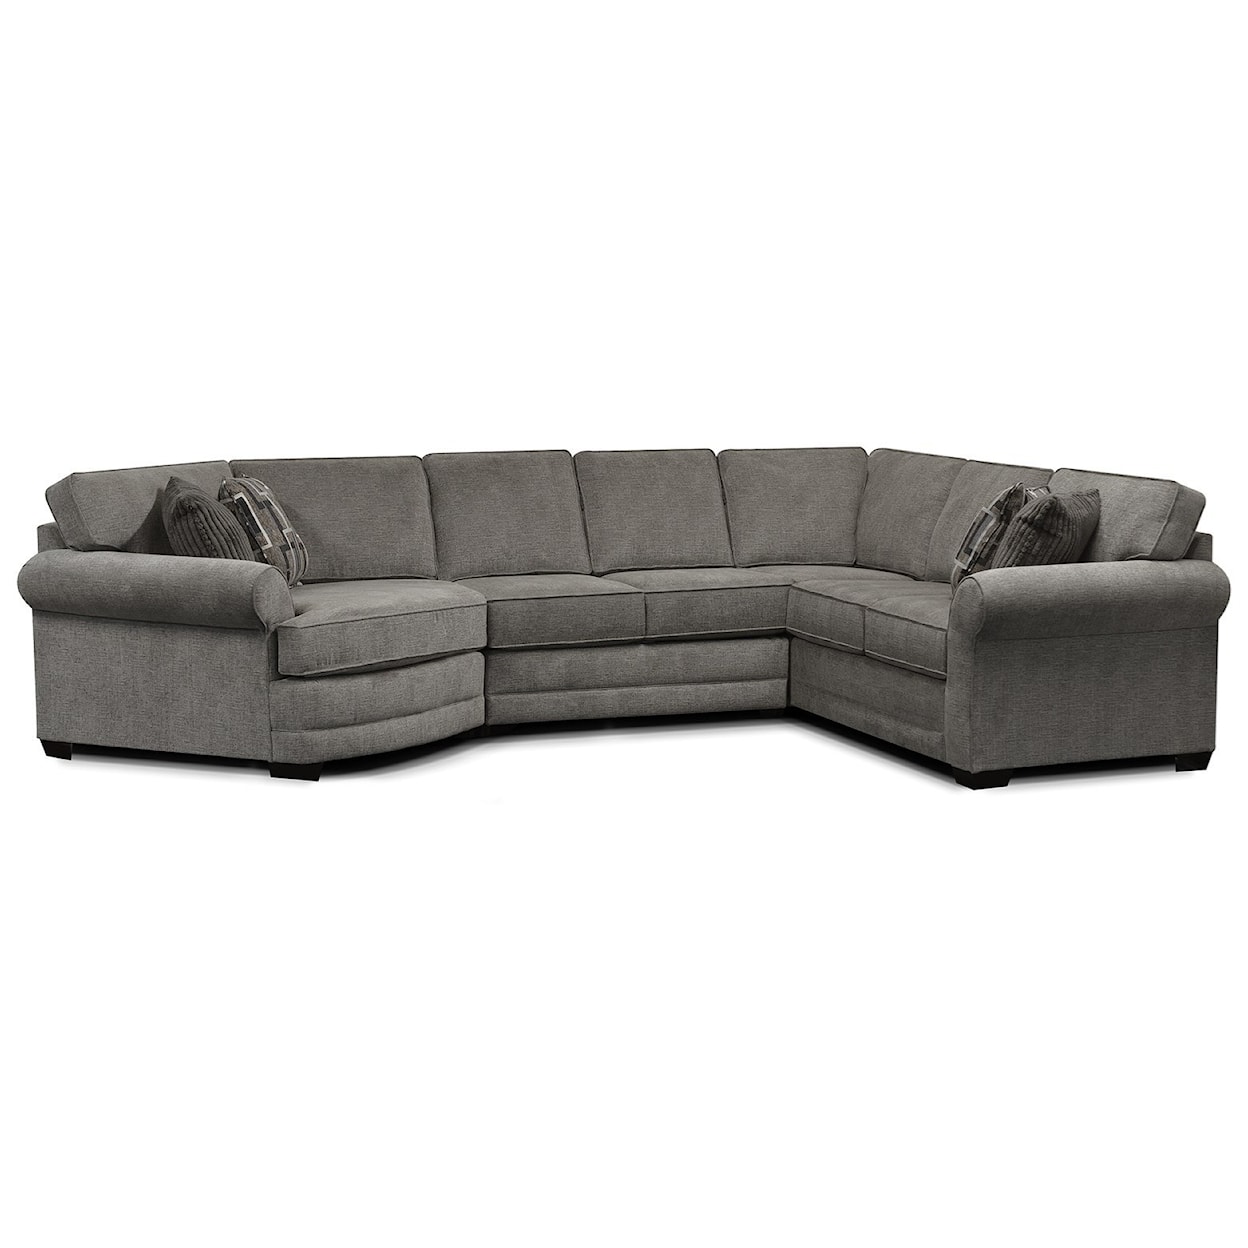 England 5630 Series 4-Piece Sectional